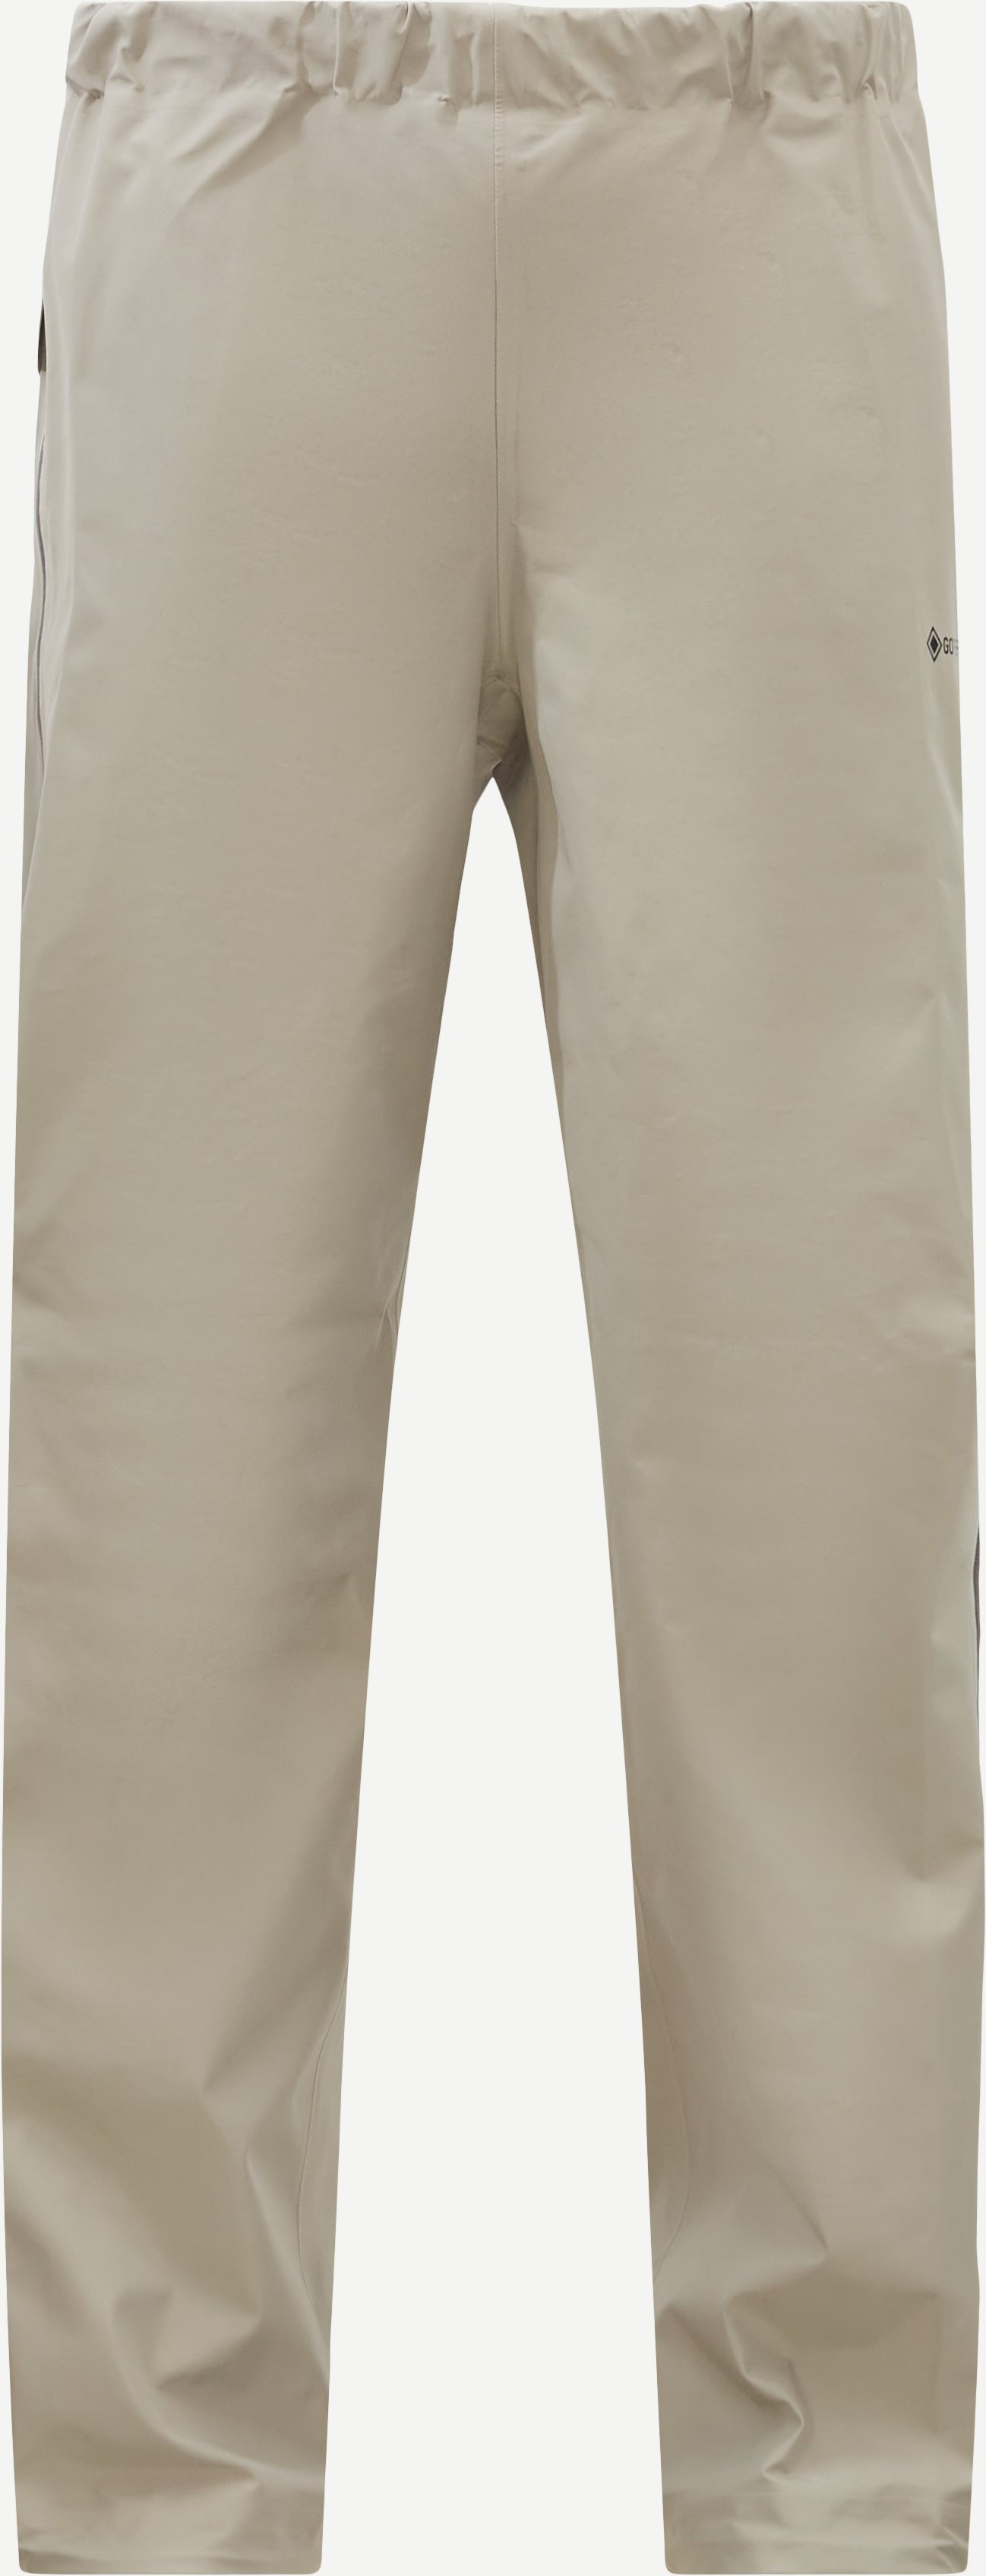 Norse Projects Trousers SHELL PANT GORE-TEX 3L Sand